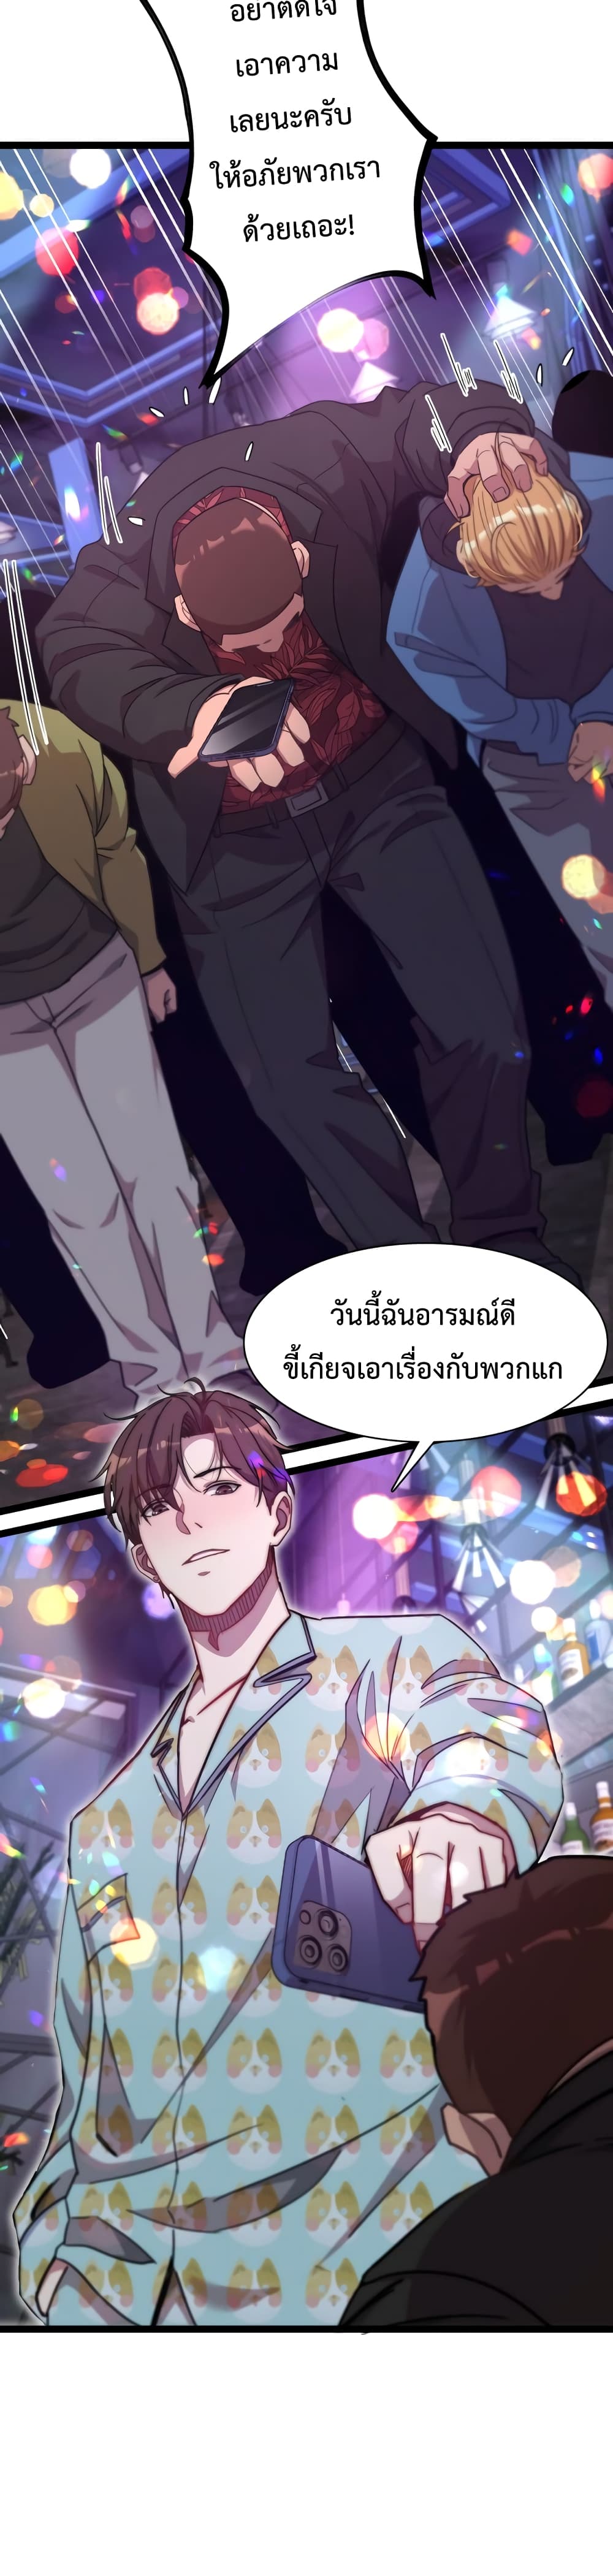 I’m Stuck on the Same Day for a Thousand Years ตอนที่ 1 26